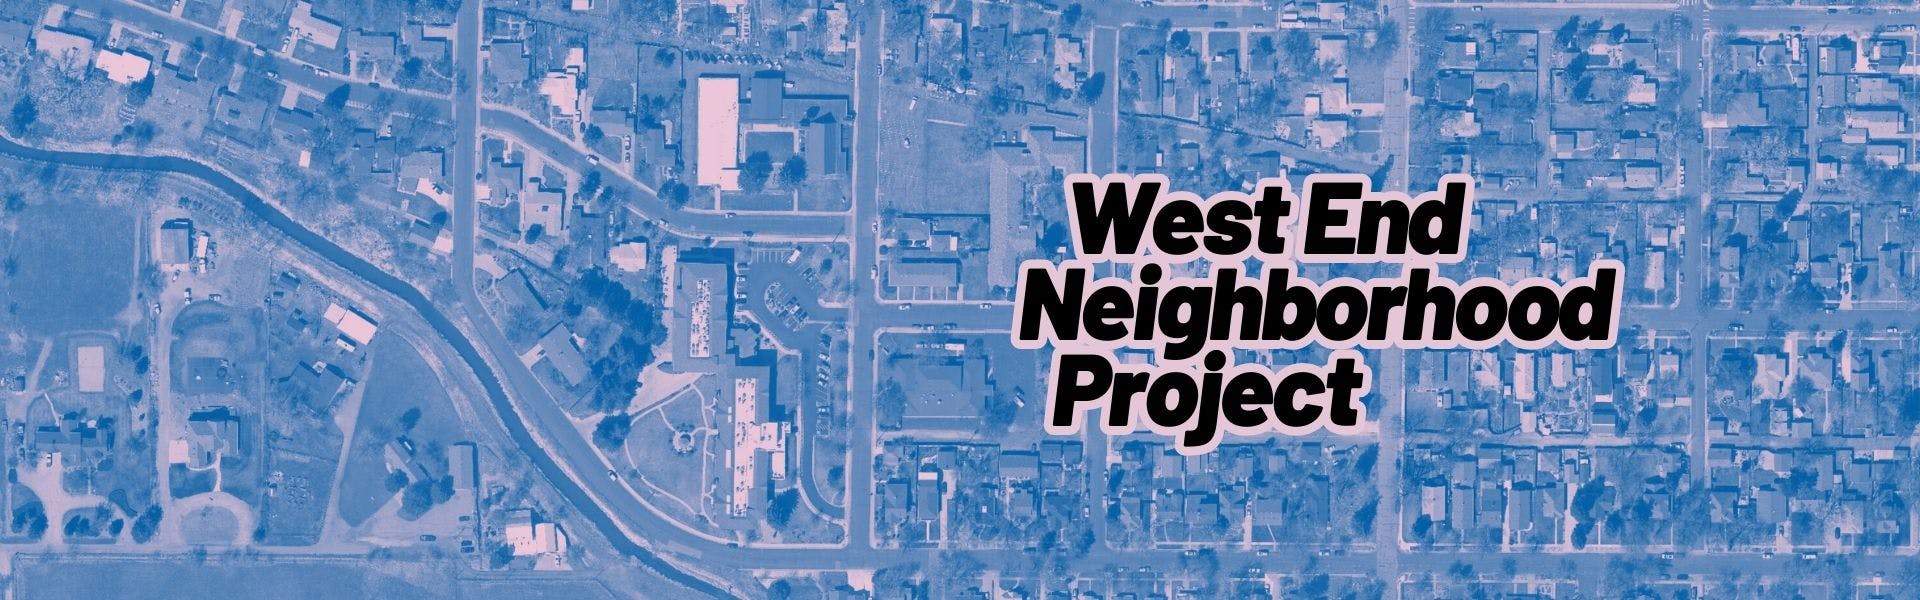 An aerial photograph of the neighborhood with the text, "West End Neighborhood Project."